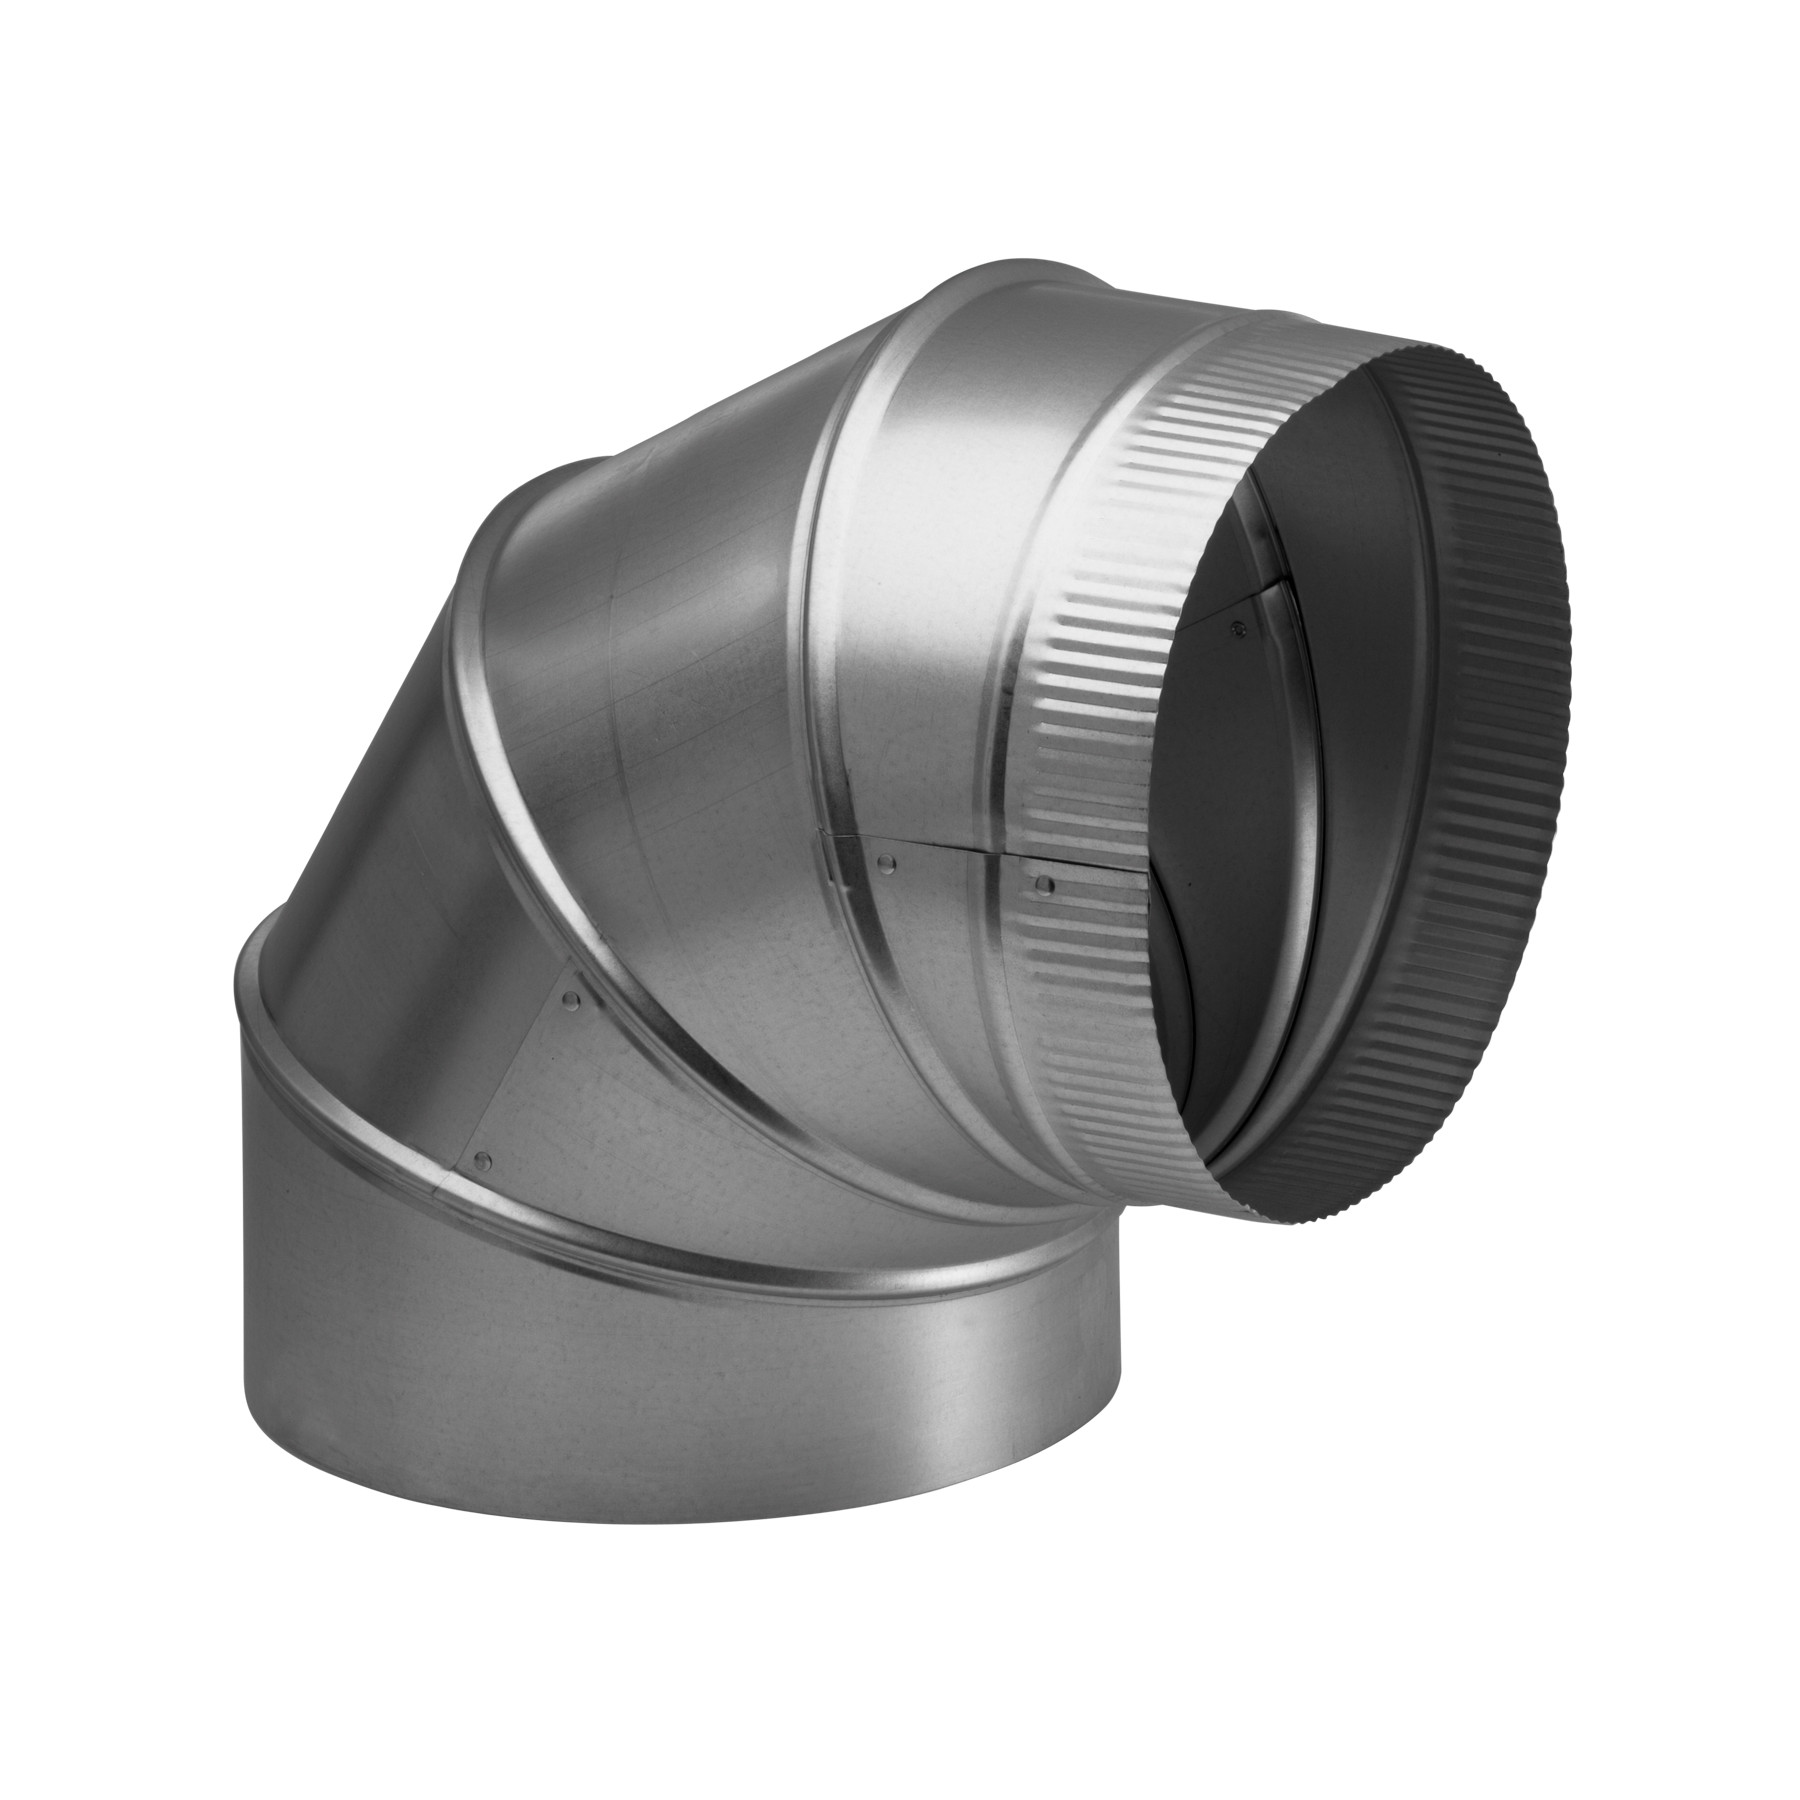 7-Inch Round Elbow Duct for Range Hoods and Bath Ventilation Fans